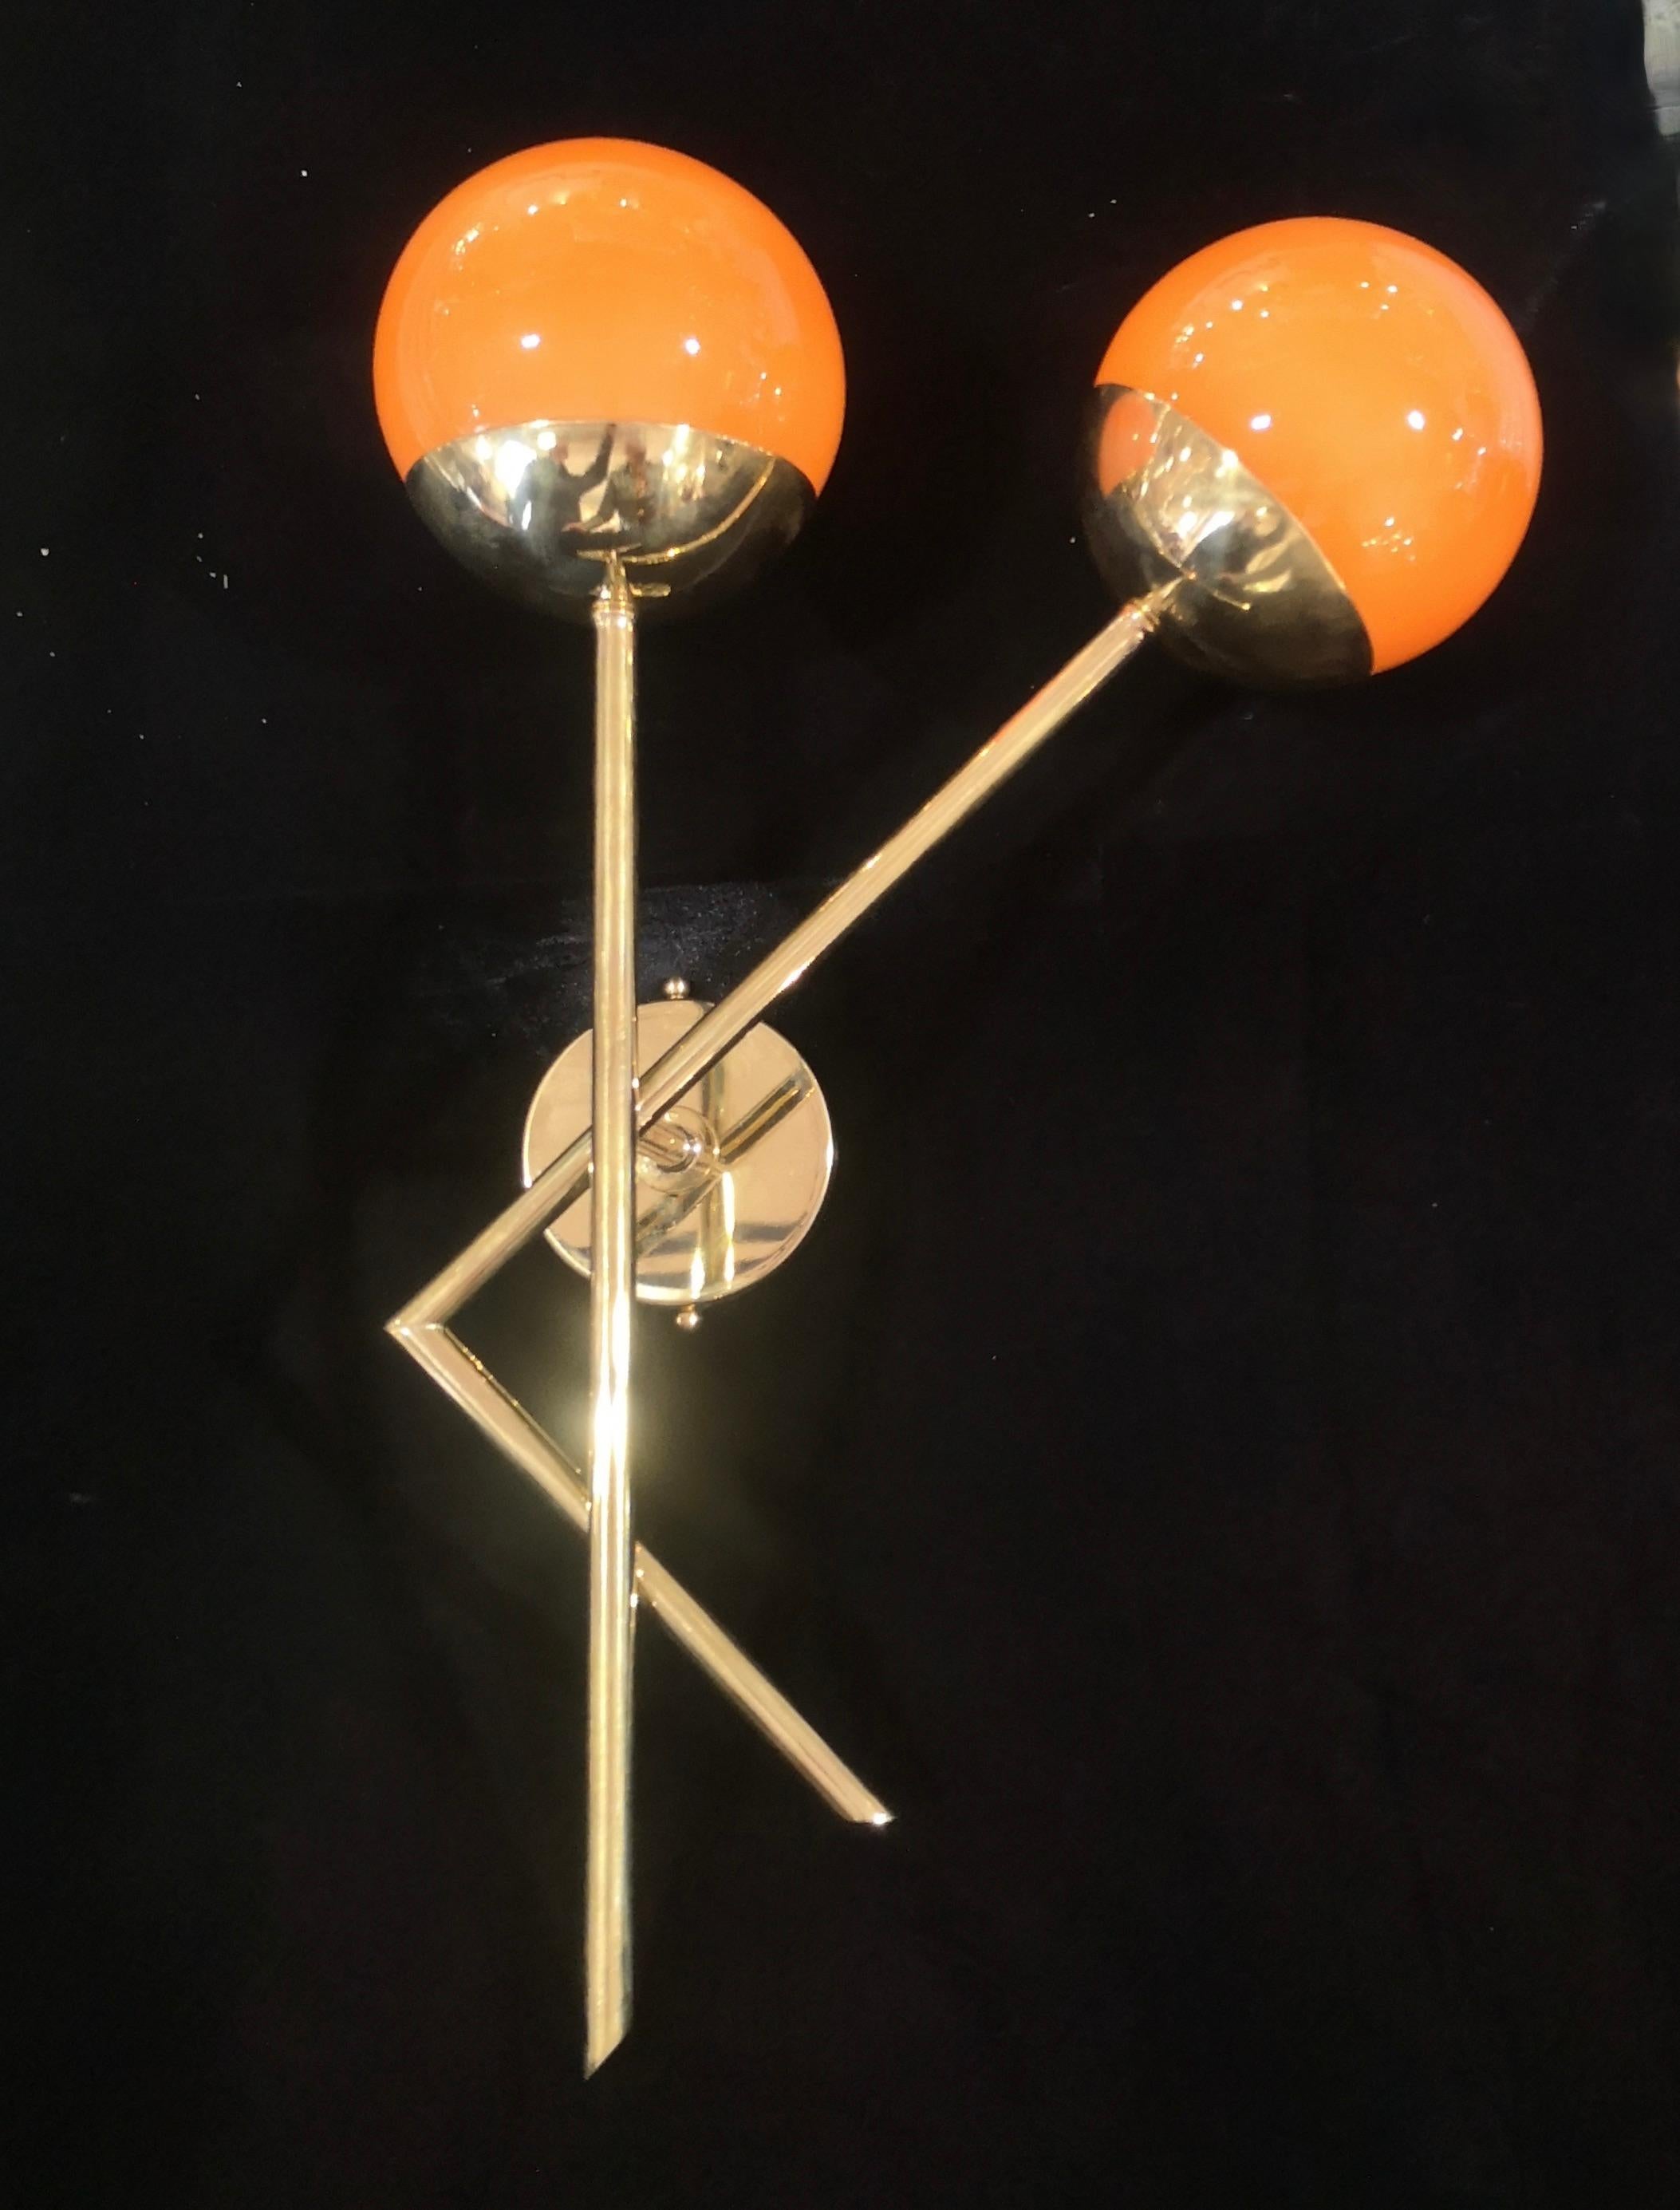 Refined and delicate design for this wall light with orange color Murano glass.

The applique are made up of a brass structure that allows the housing of a beautiful orange color Murano glass sphere. The design is very clean and simple, but at the